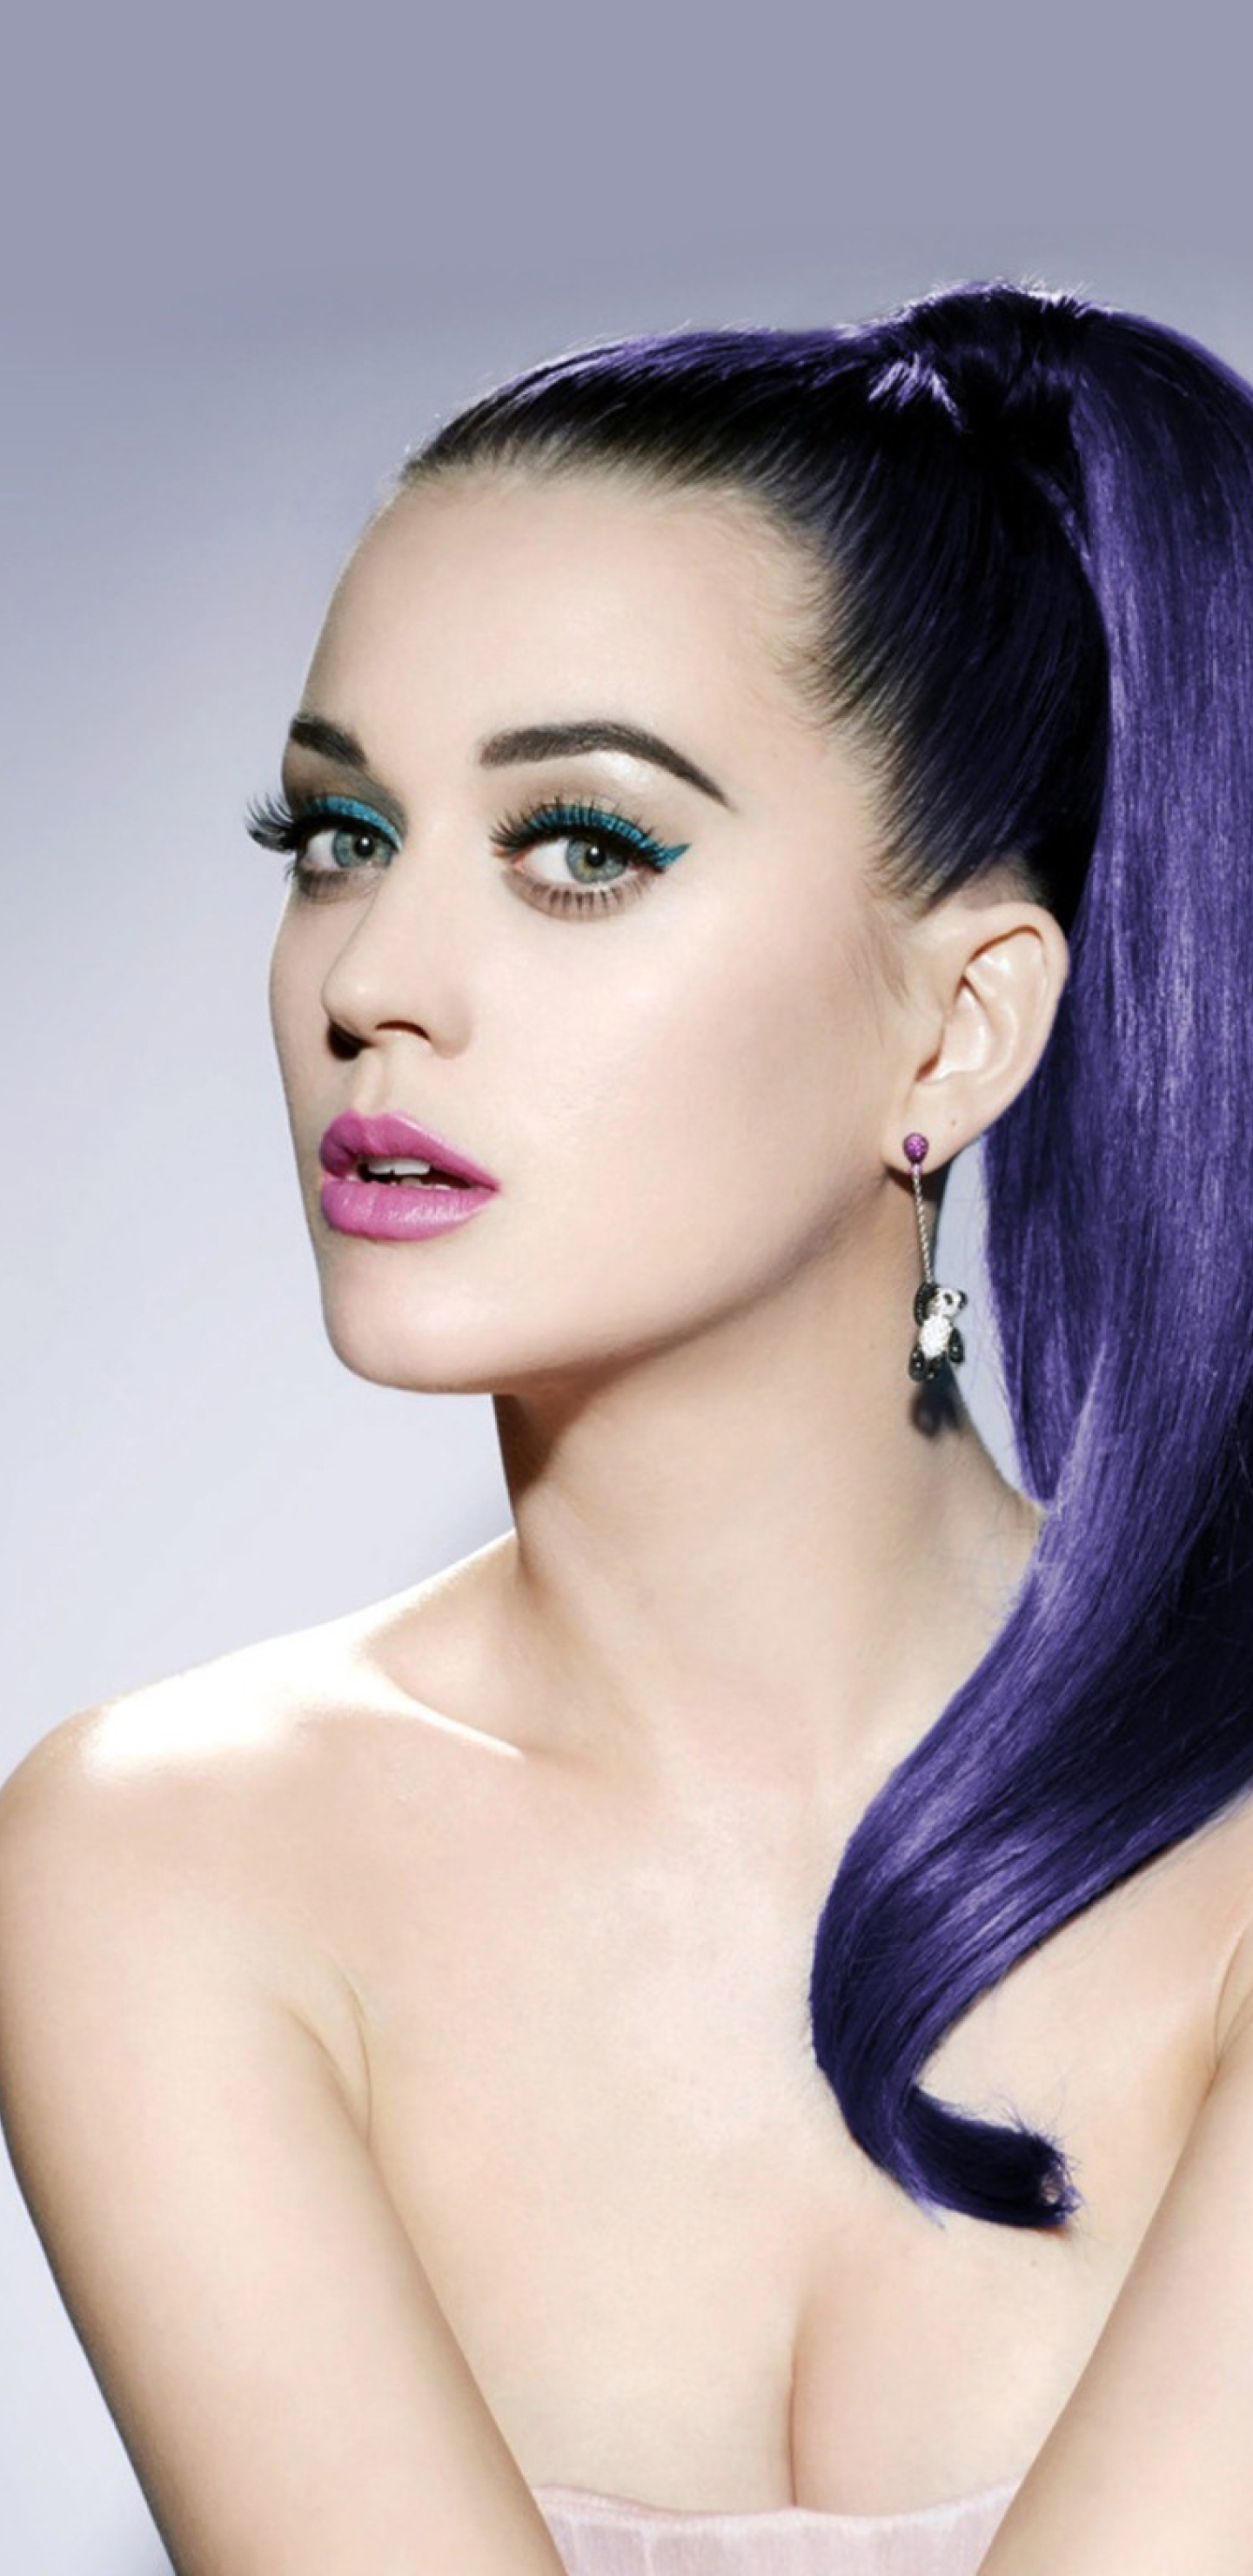 1440x2960 Katy Perry Stunning wallpapers Samsung Galaxy Note 9,8, S9,S8 ...